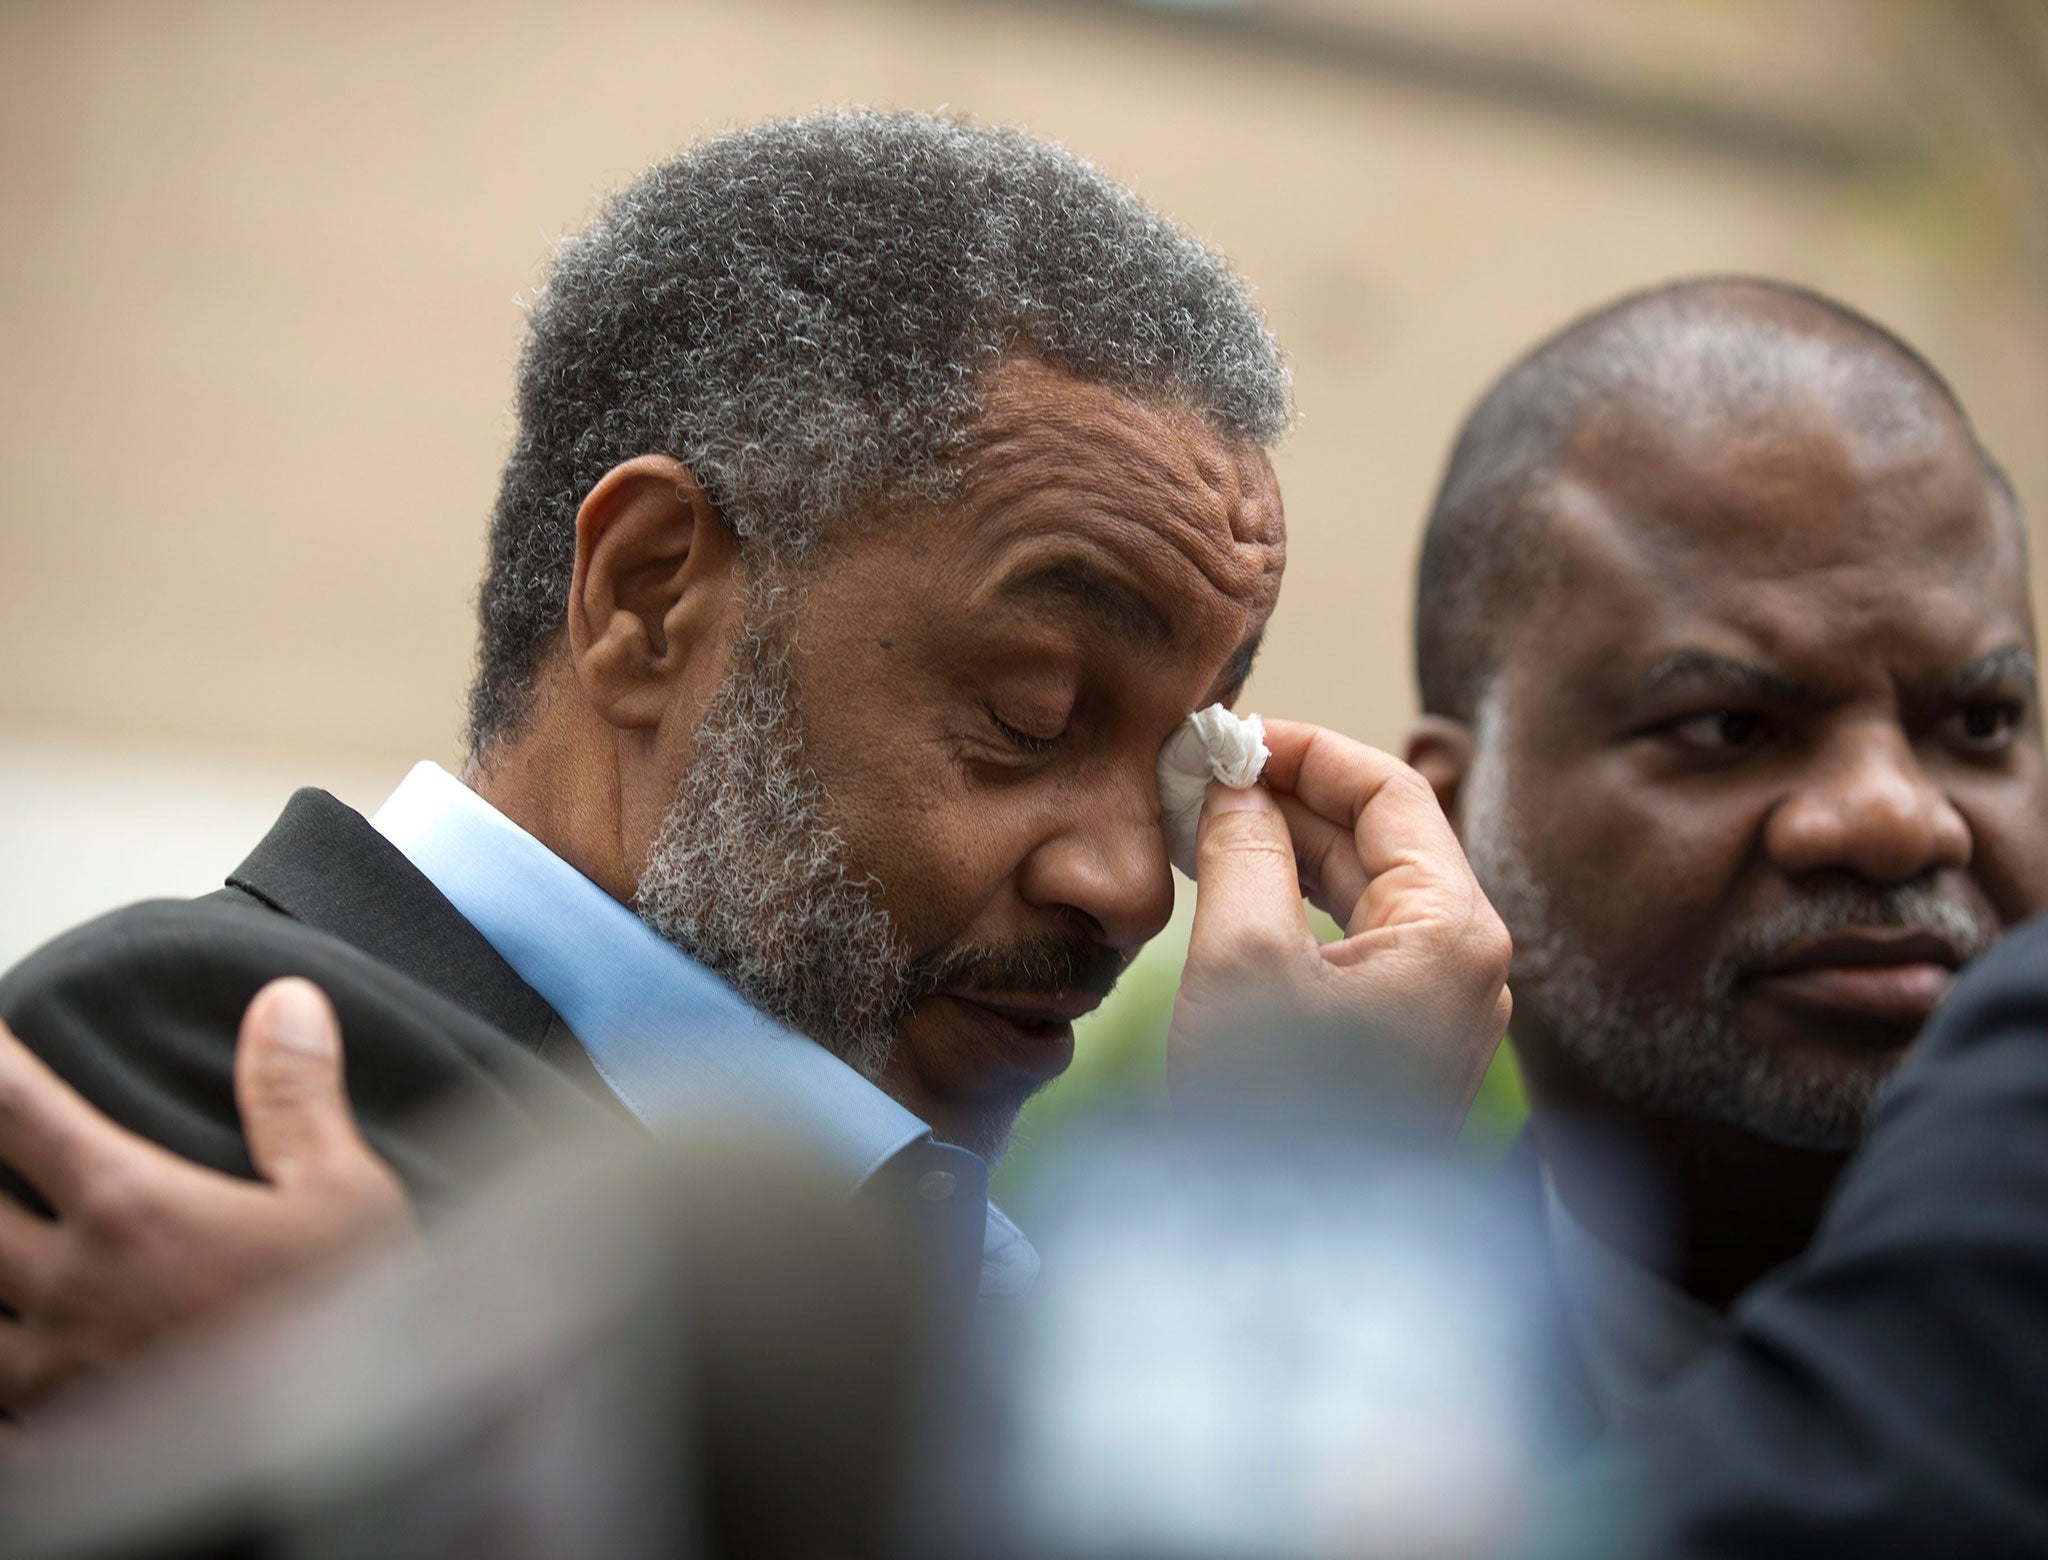 Anthony Ray Hinton wipes away tears outside of the Jefferson County Jail upon his release after serving 28 years on death row, in Birmingham, Alabama